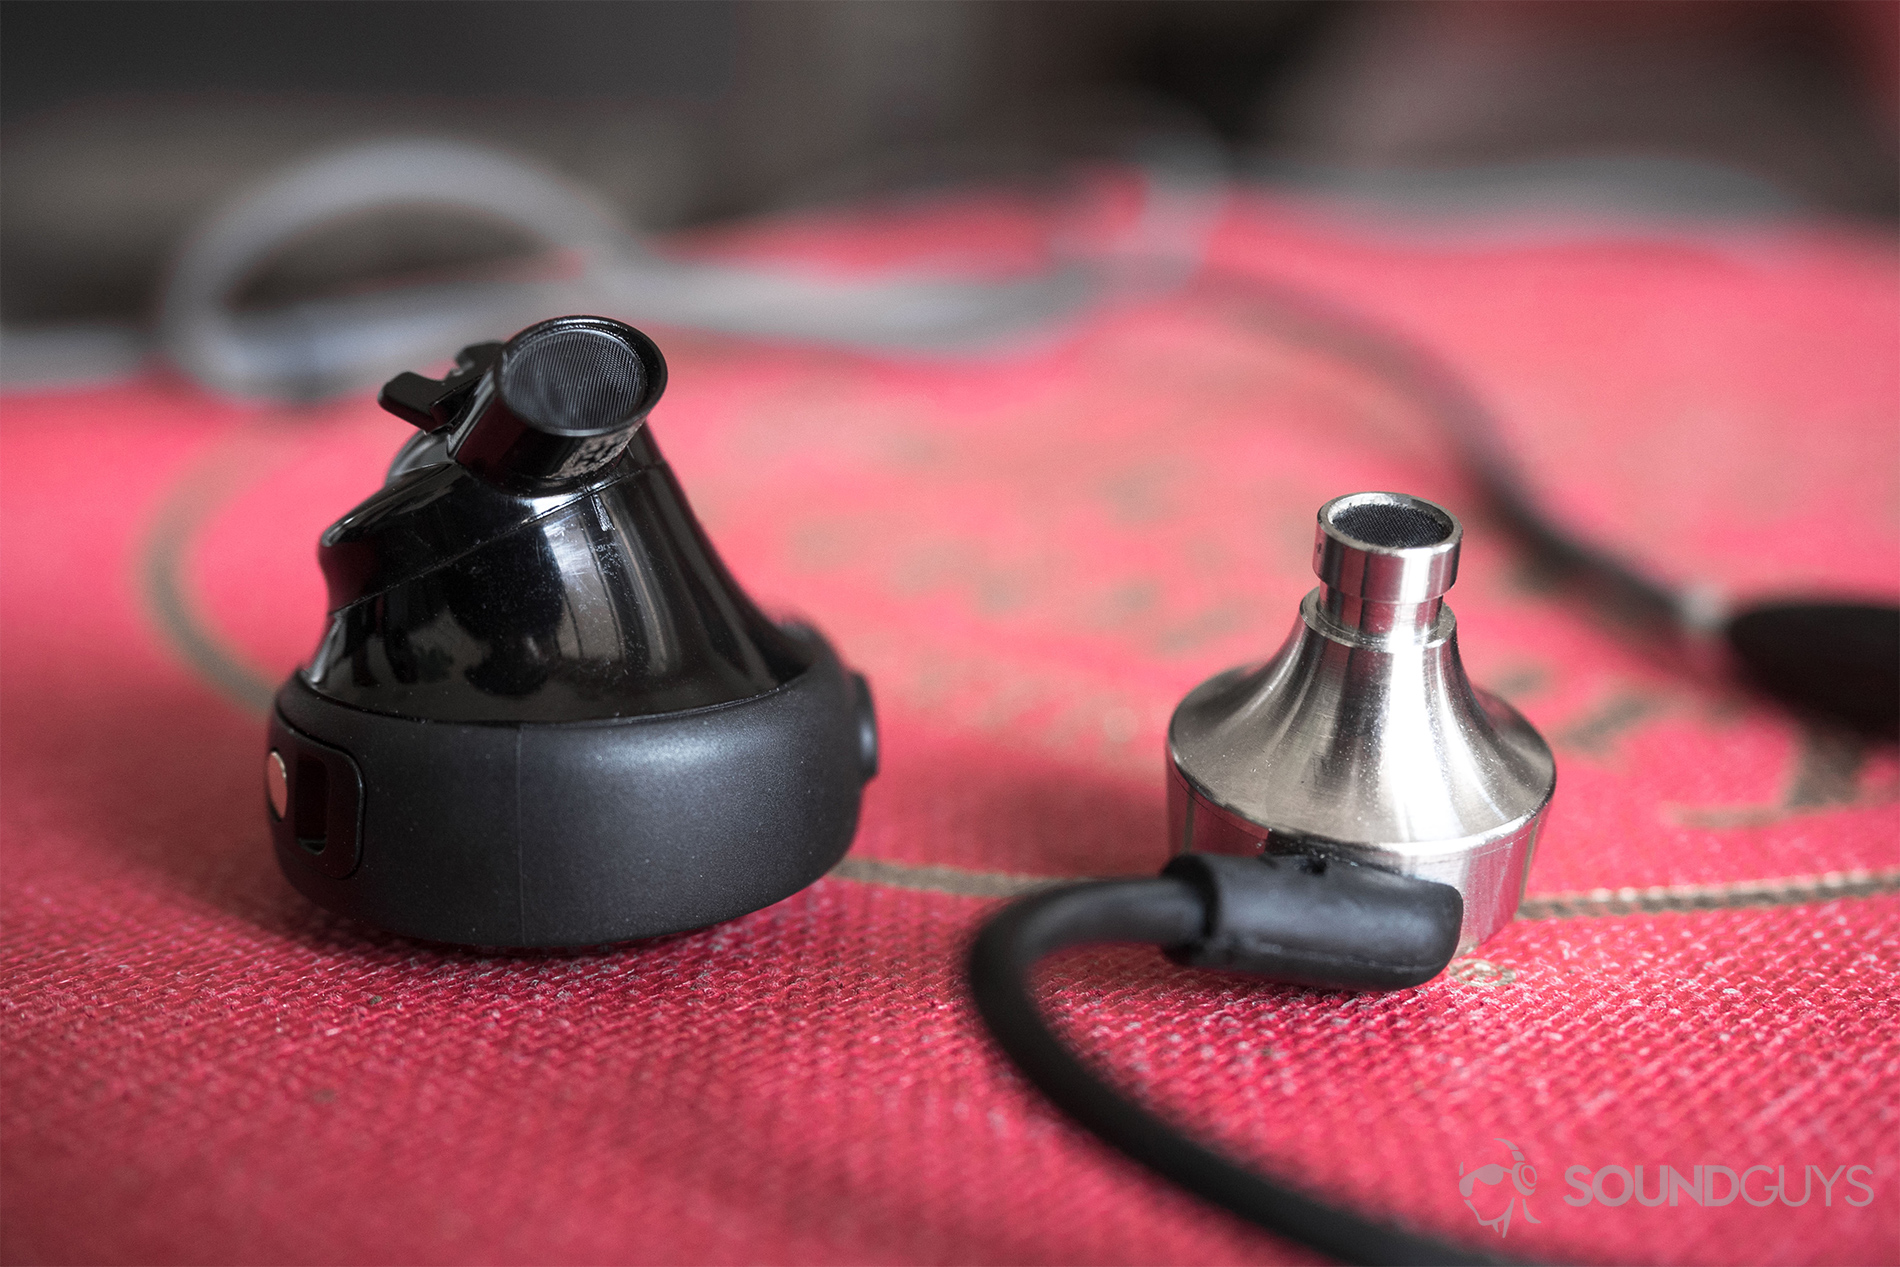 Foam Vs Silicone Earbuds: Which Is Better and Why?